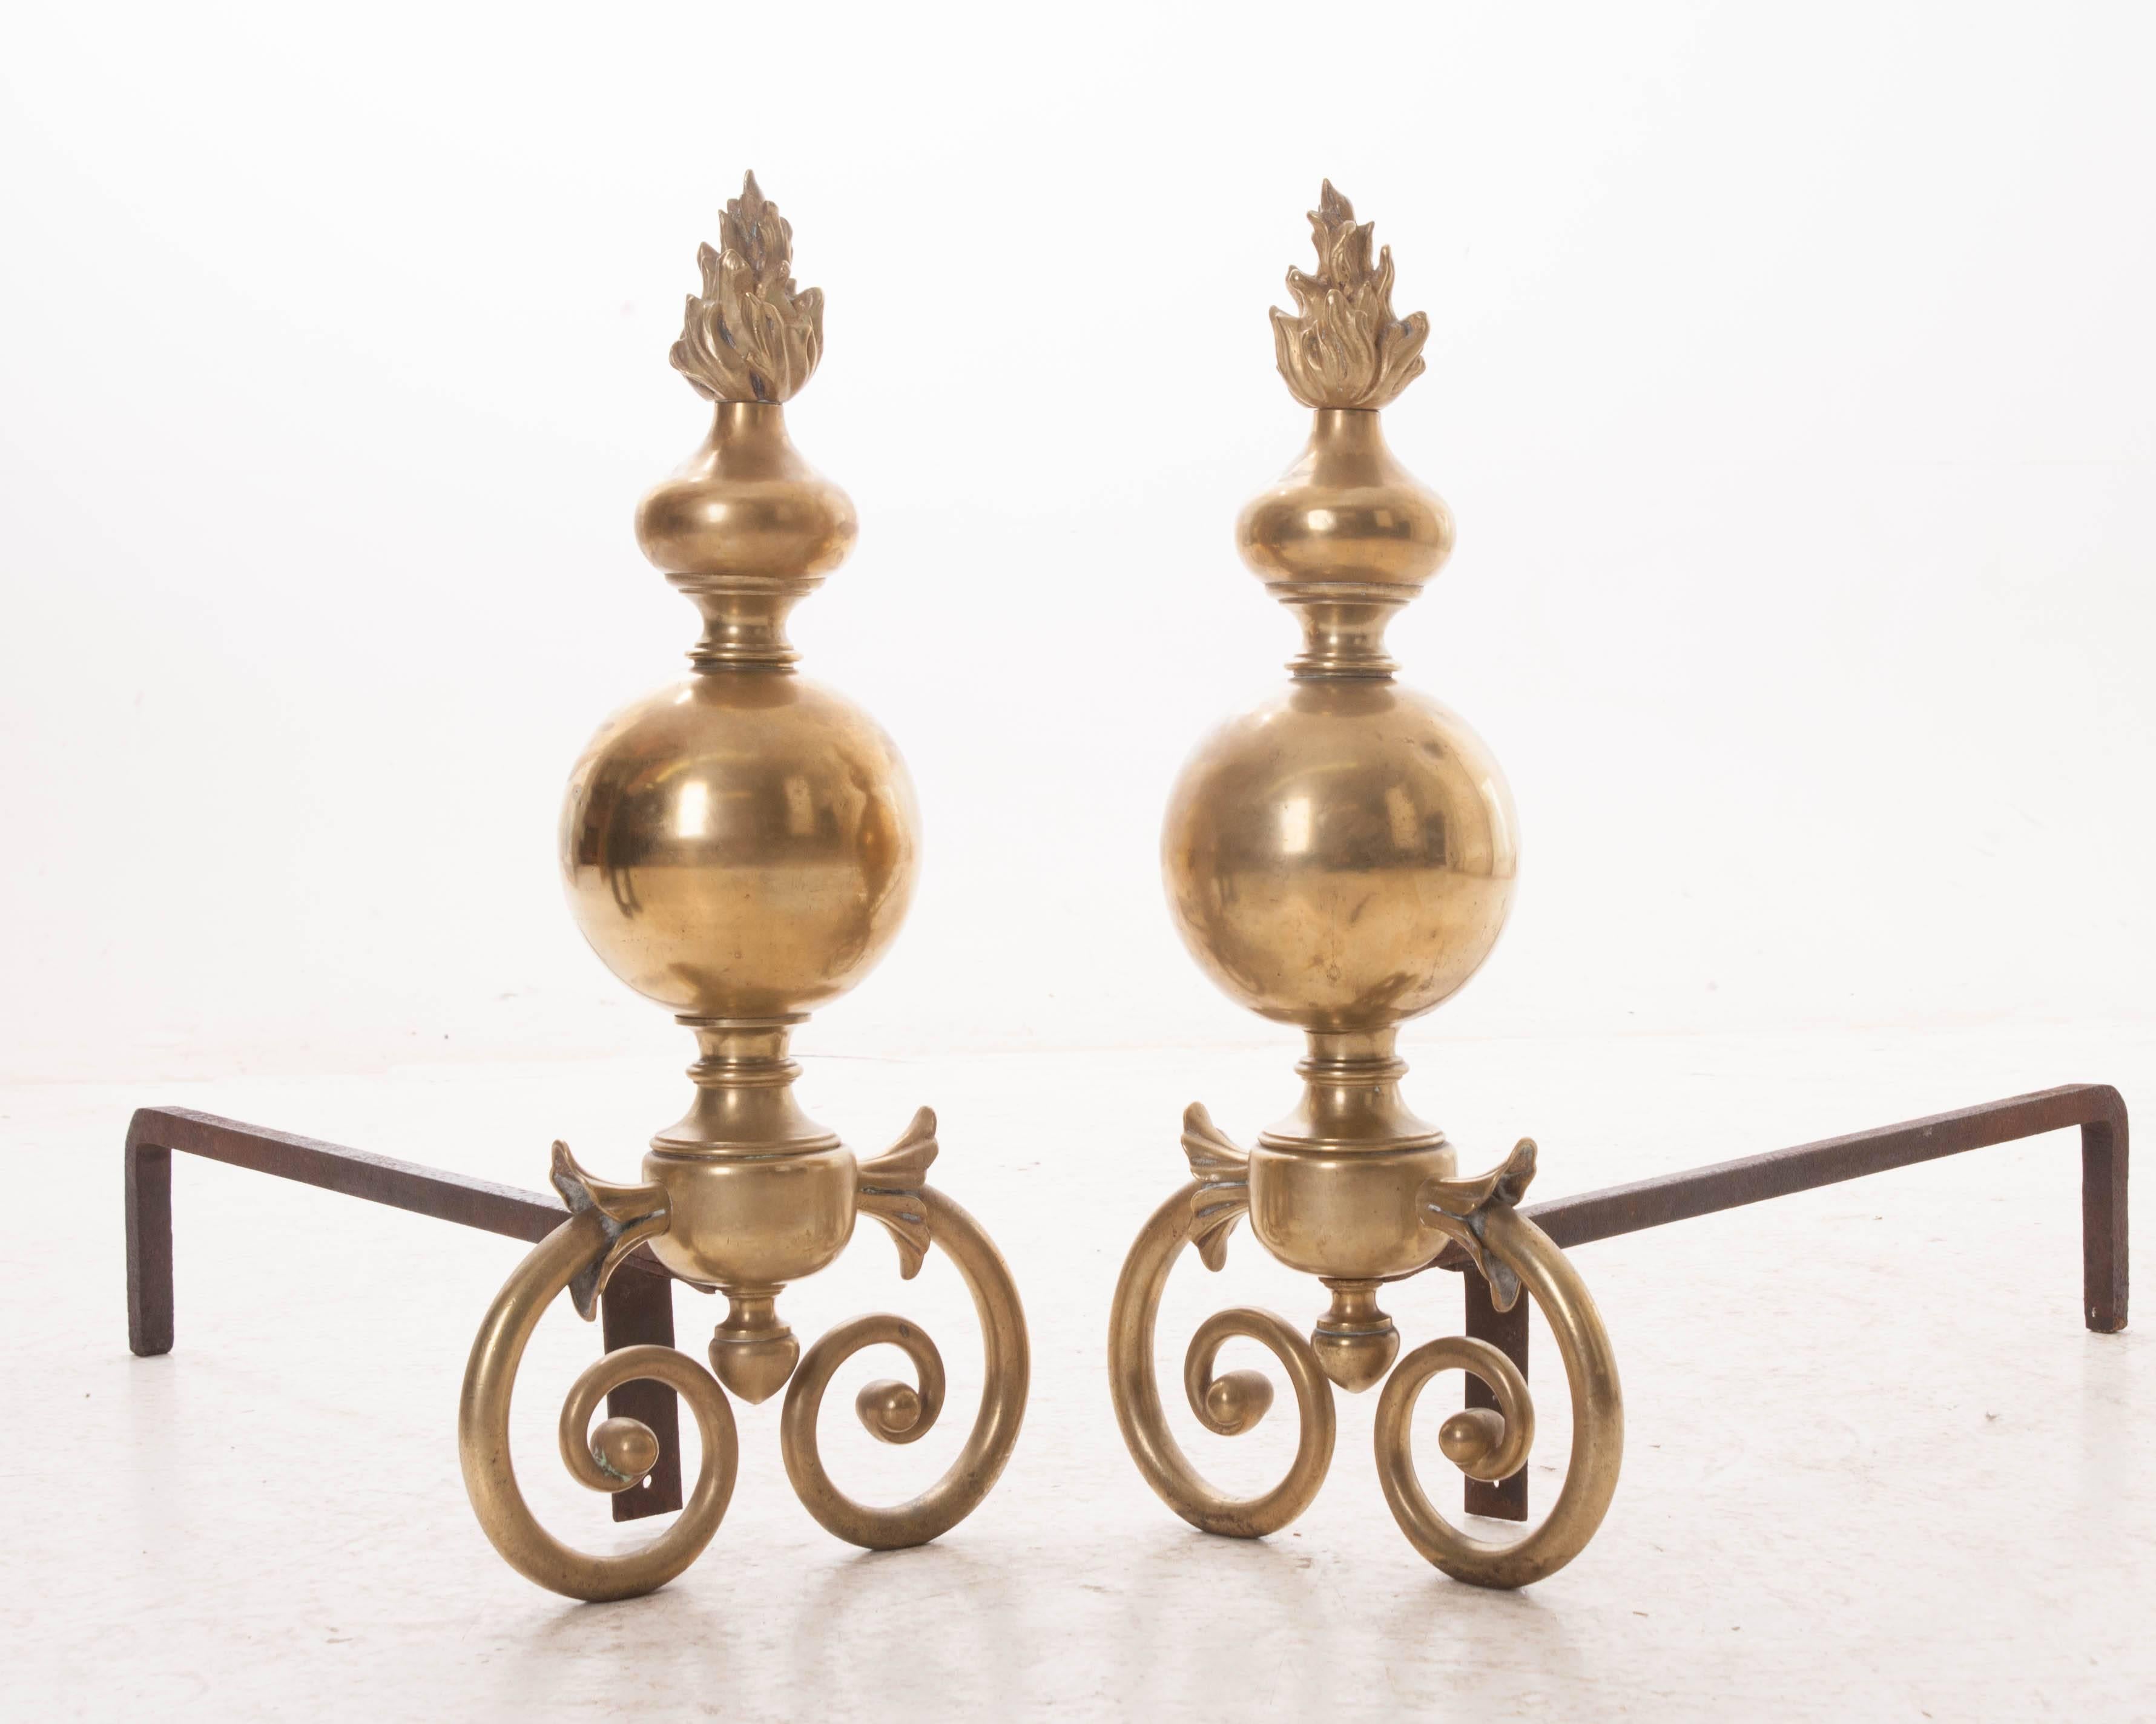 A striking pair of large-scale French 18th century Louis XIV brass andirons. Crowned with flickering flame finials, these larger than life andirons are not only bold and commanding, but beautiful and majestic. A nearly 250 year life span has